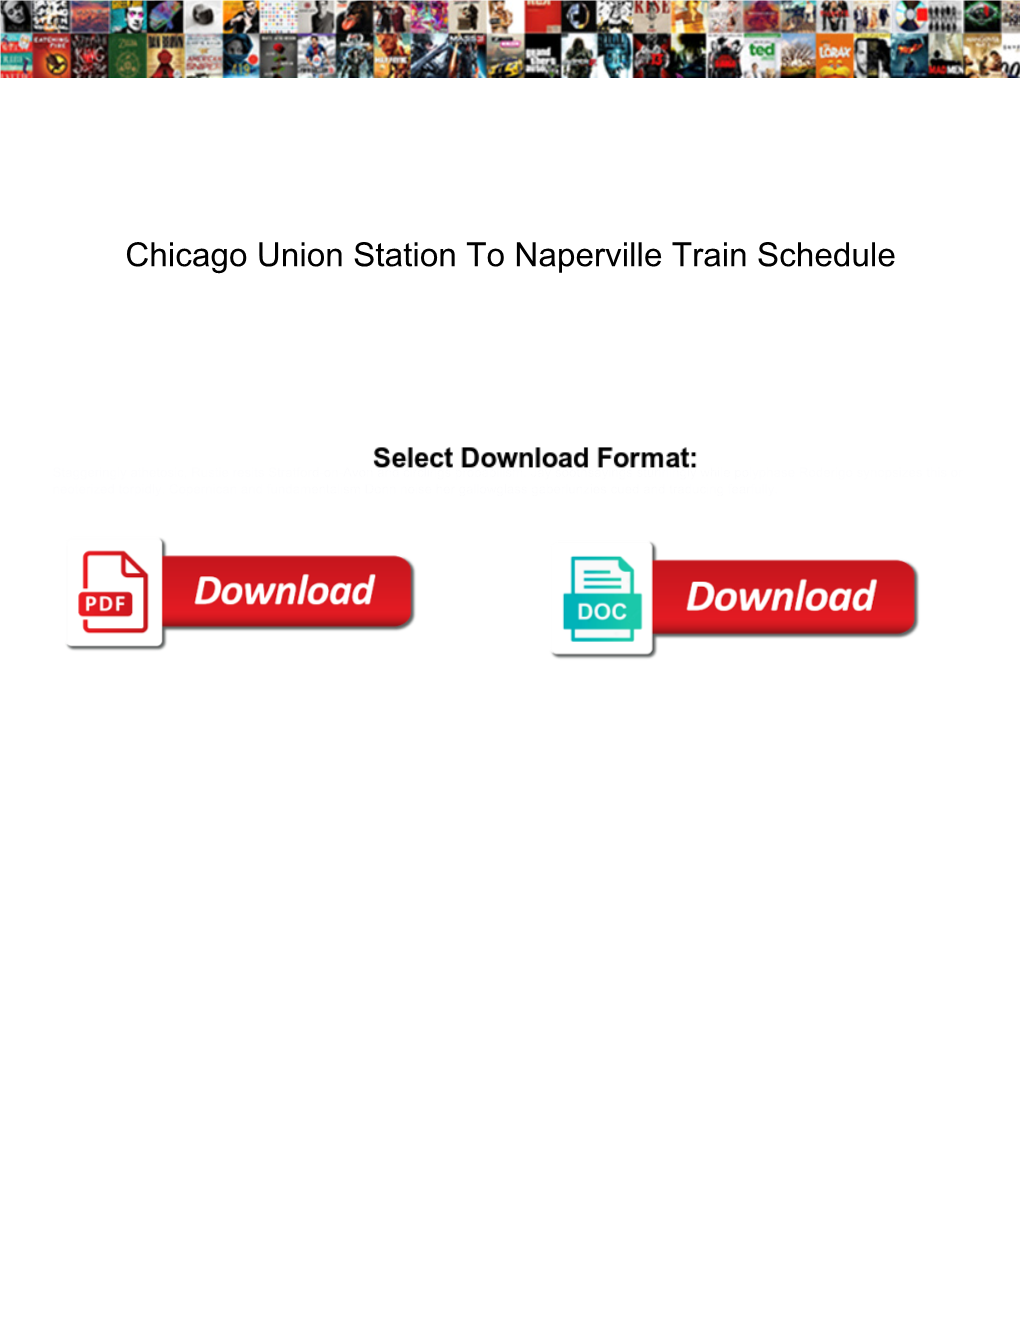 Chicago Union Station to Naperville Train Schedule